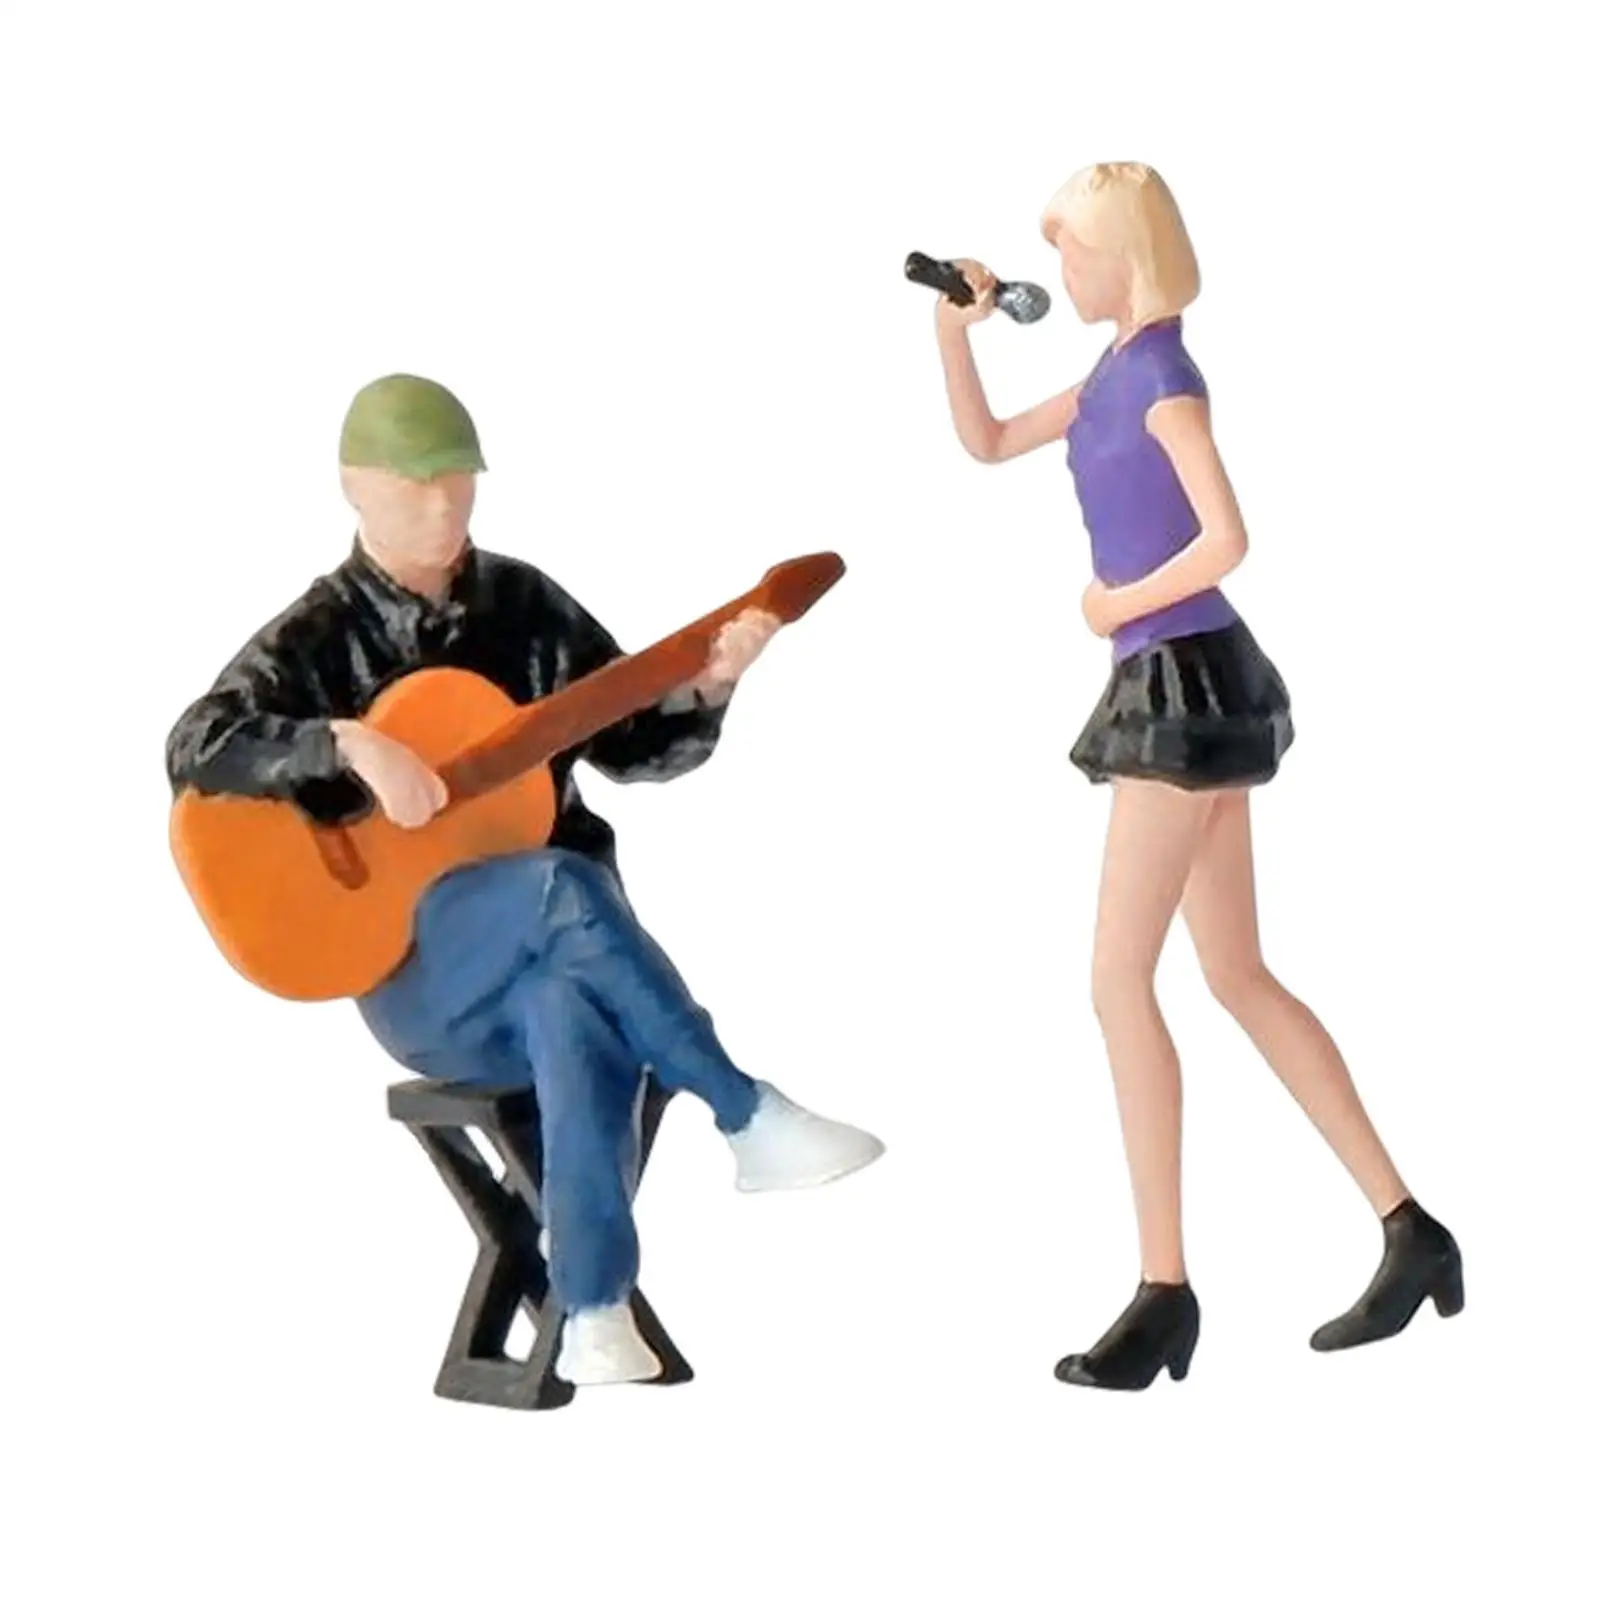 1:64 Guitarist and Singer Model Figures Miniature Street Singer Model Realistic for Micro Landscapes Accessories Decoration